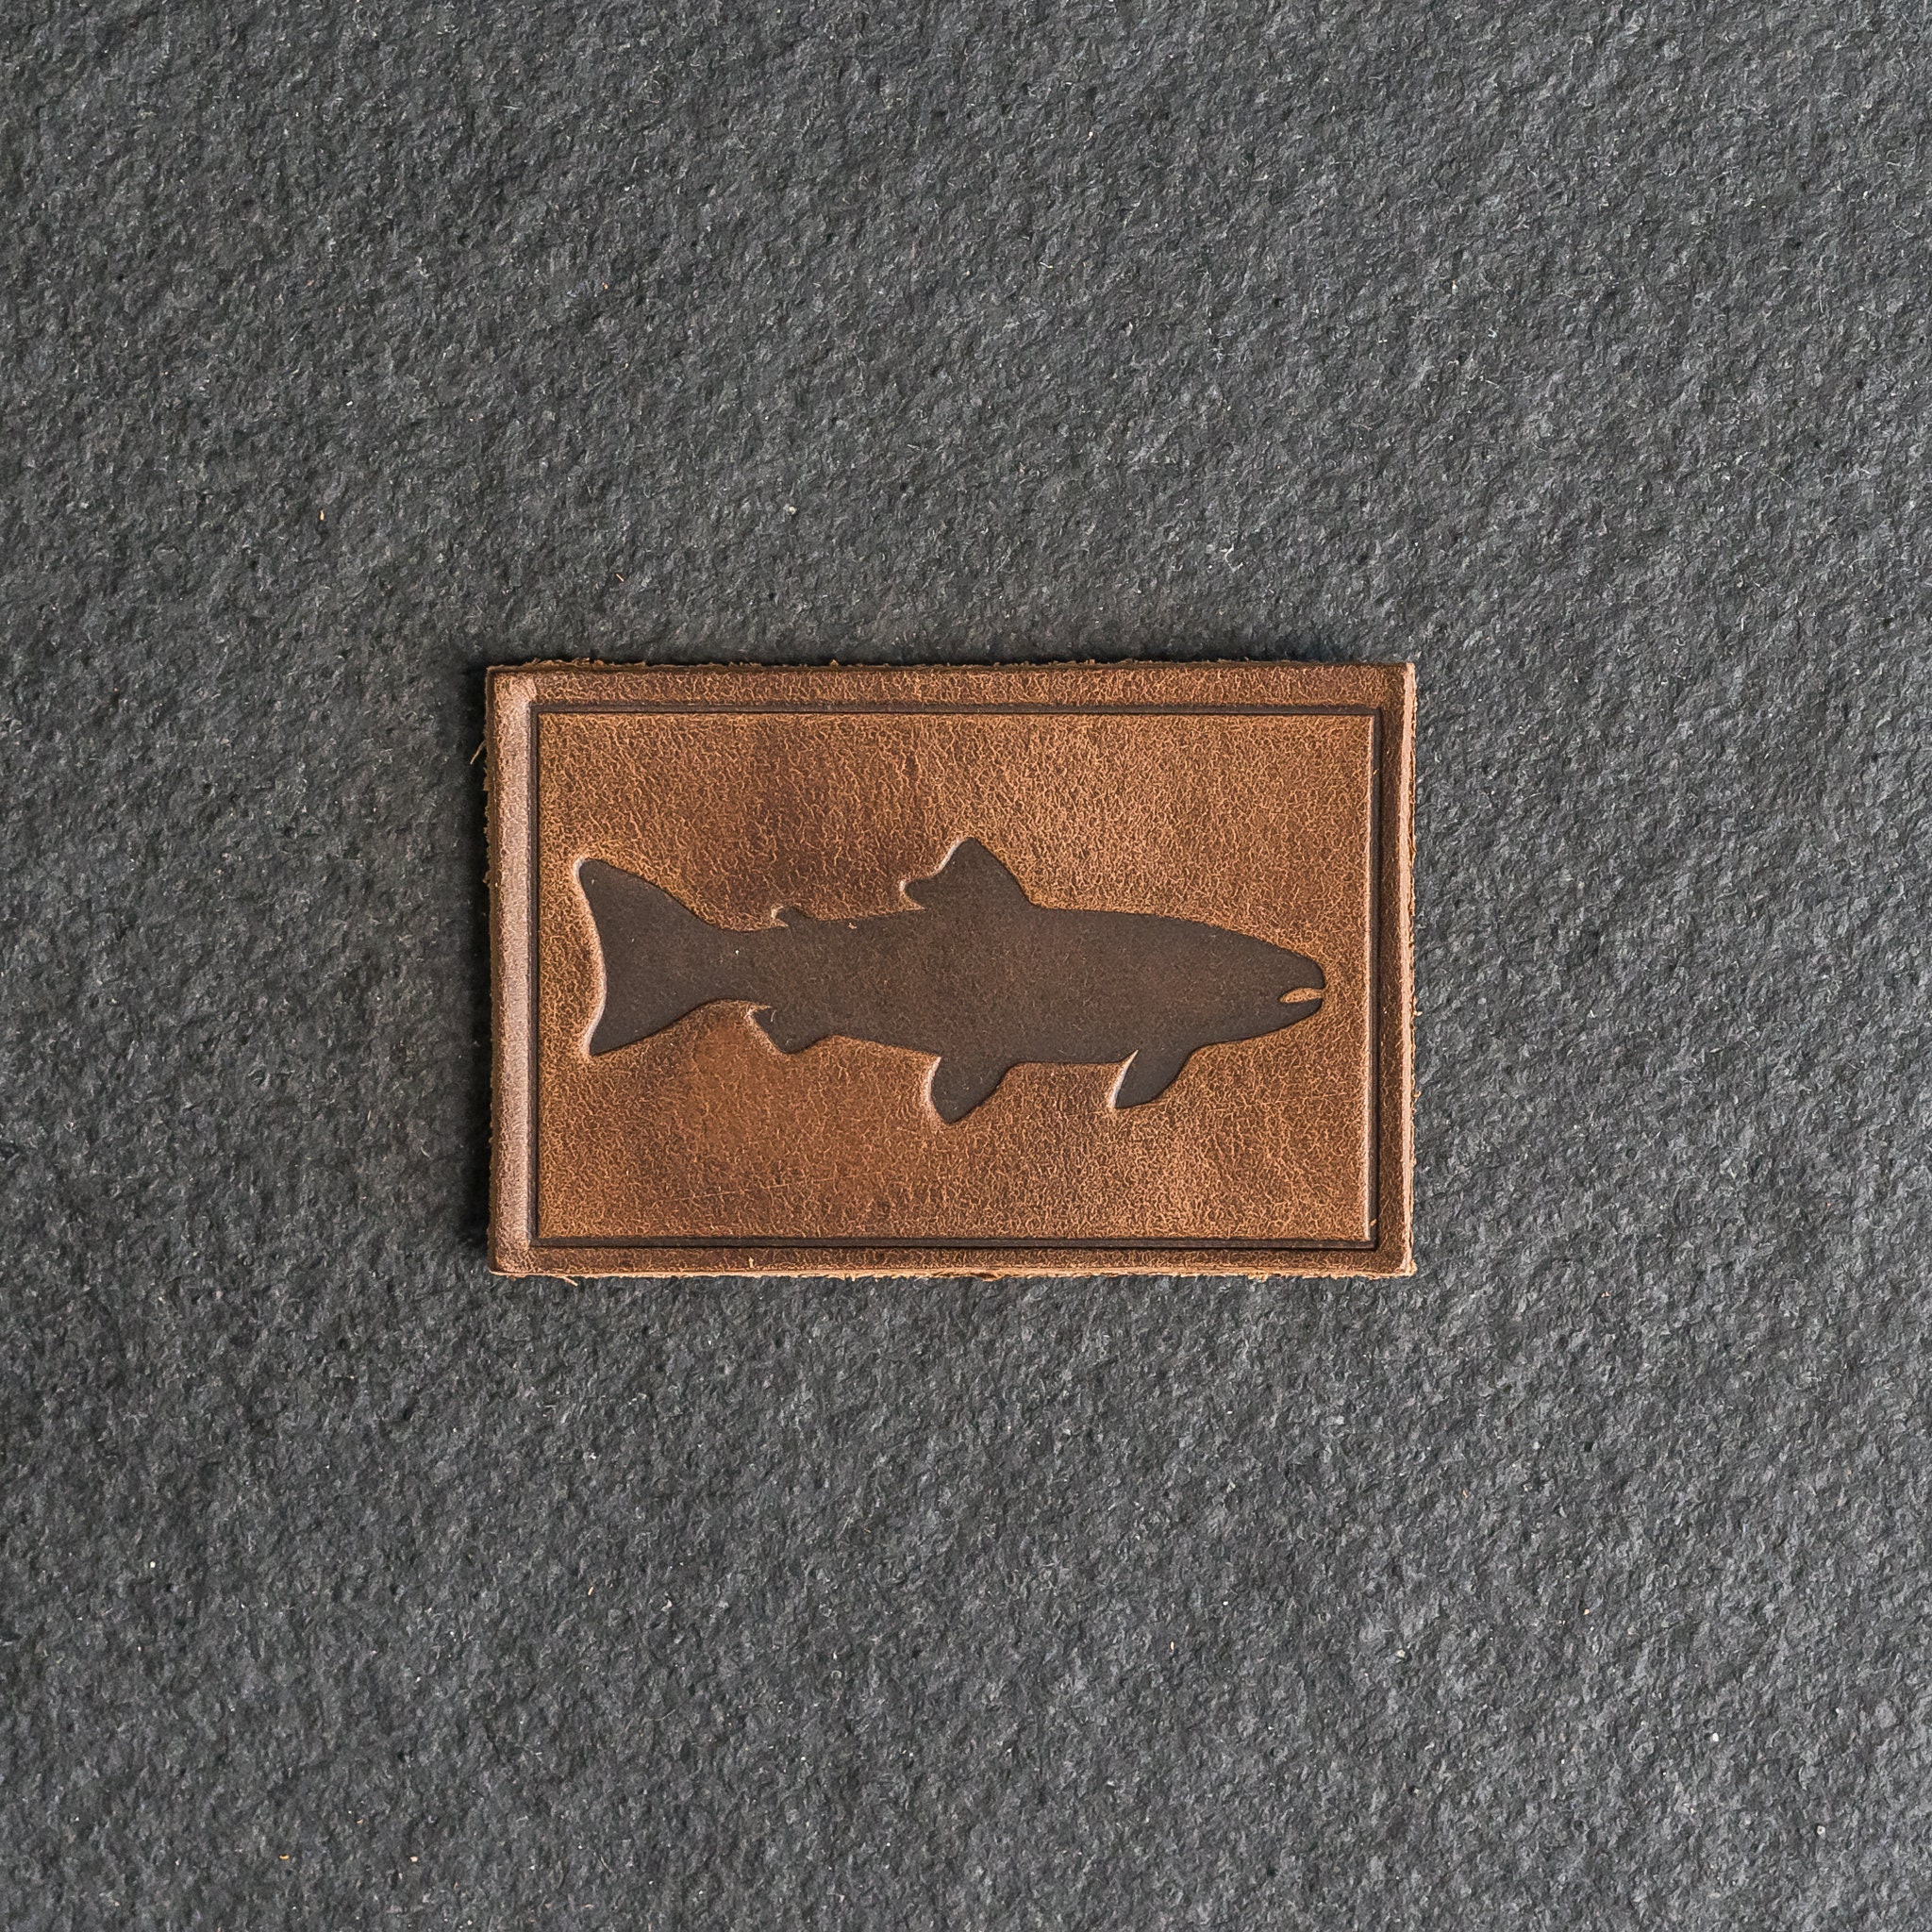 Fish Stamp Leather Patch Velcro Option 3 X 2 Rectangle Fishing